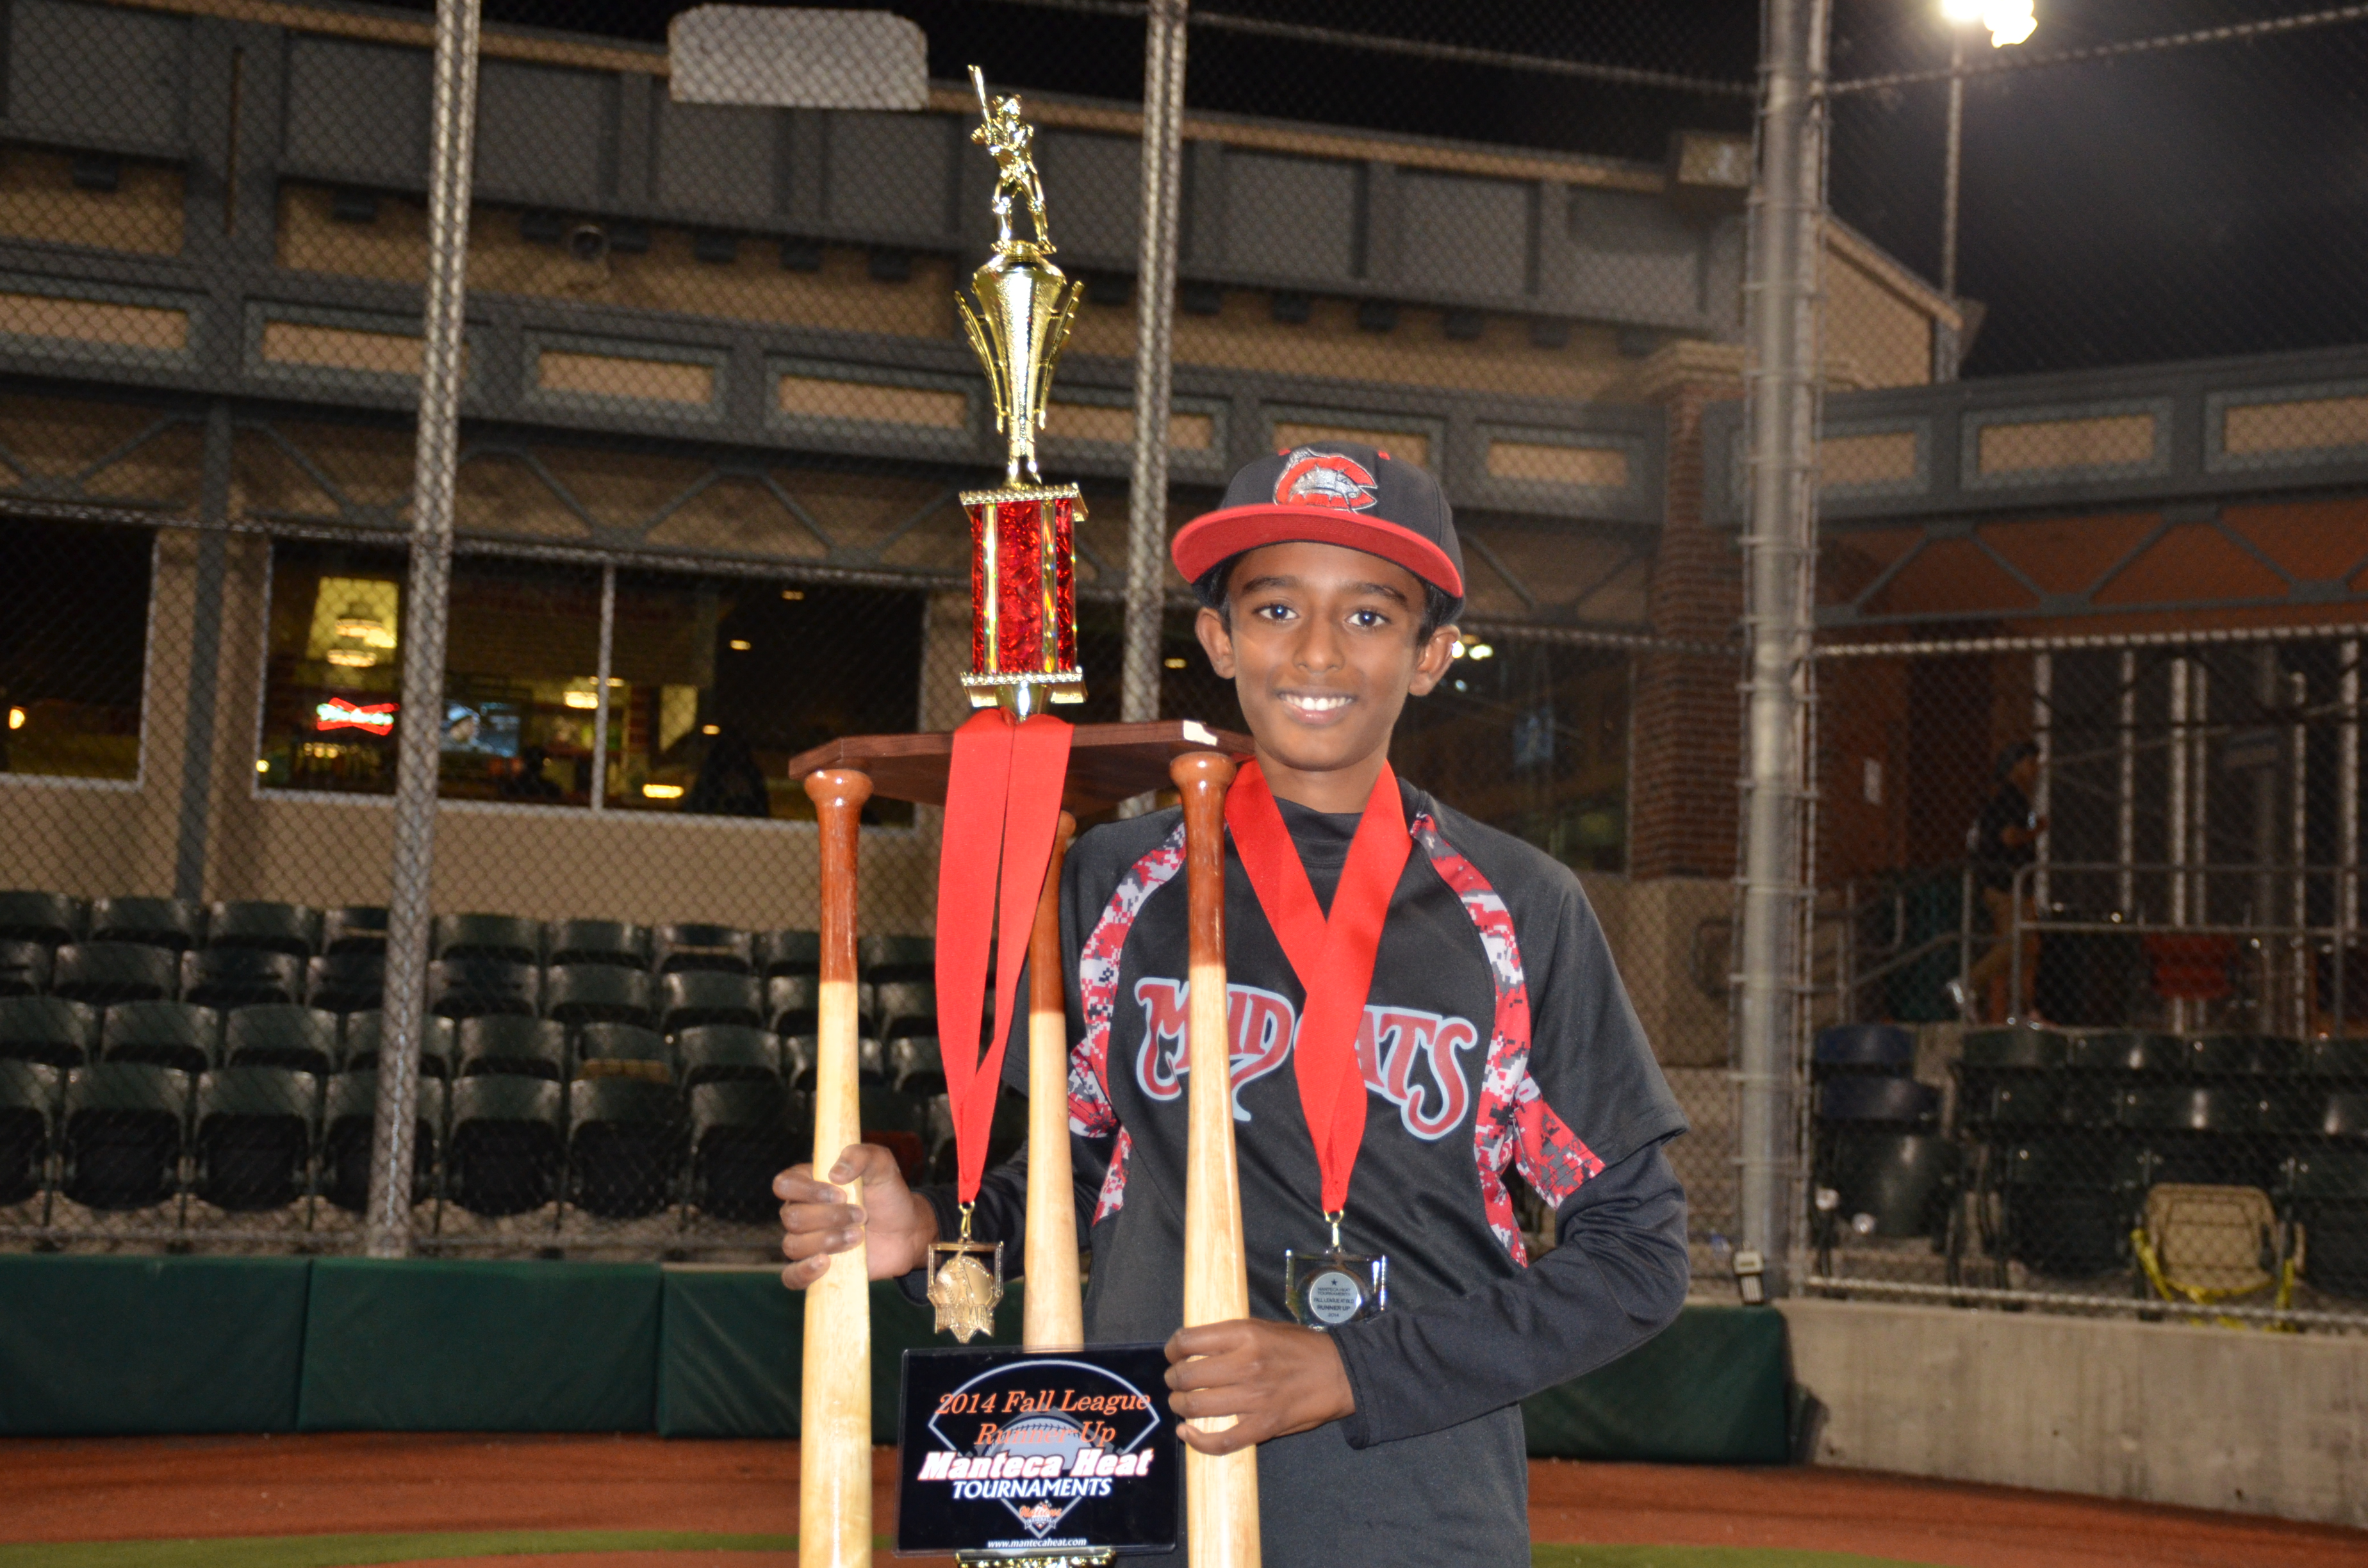 Deepa's son poses with a trophy